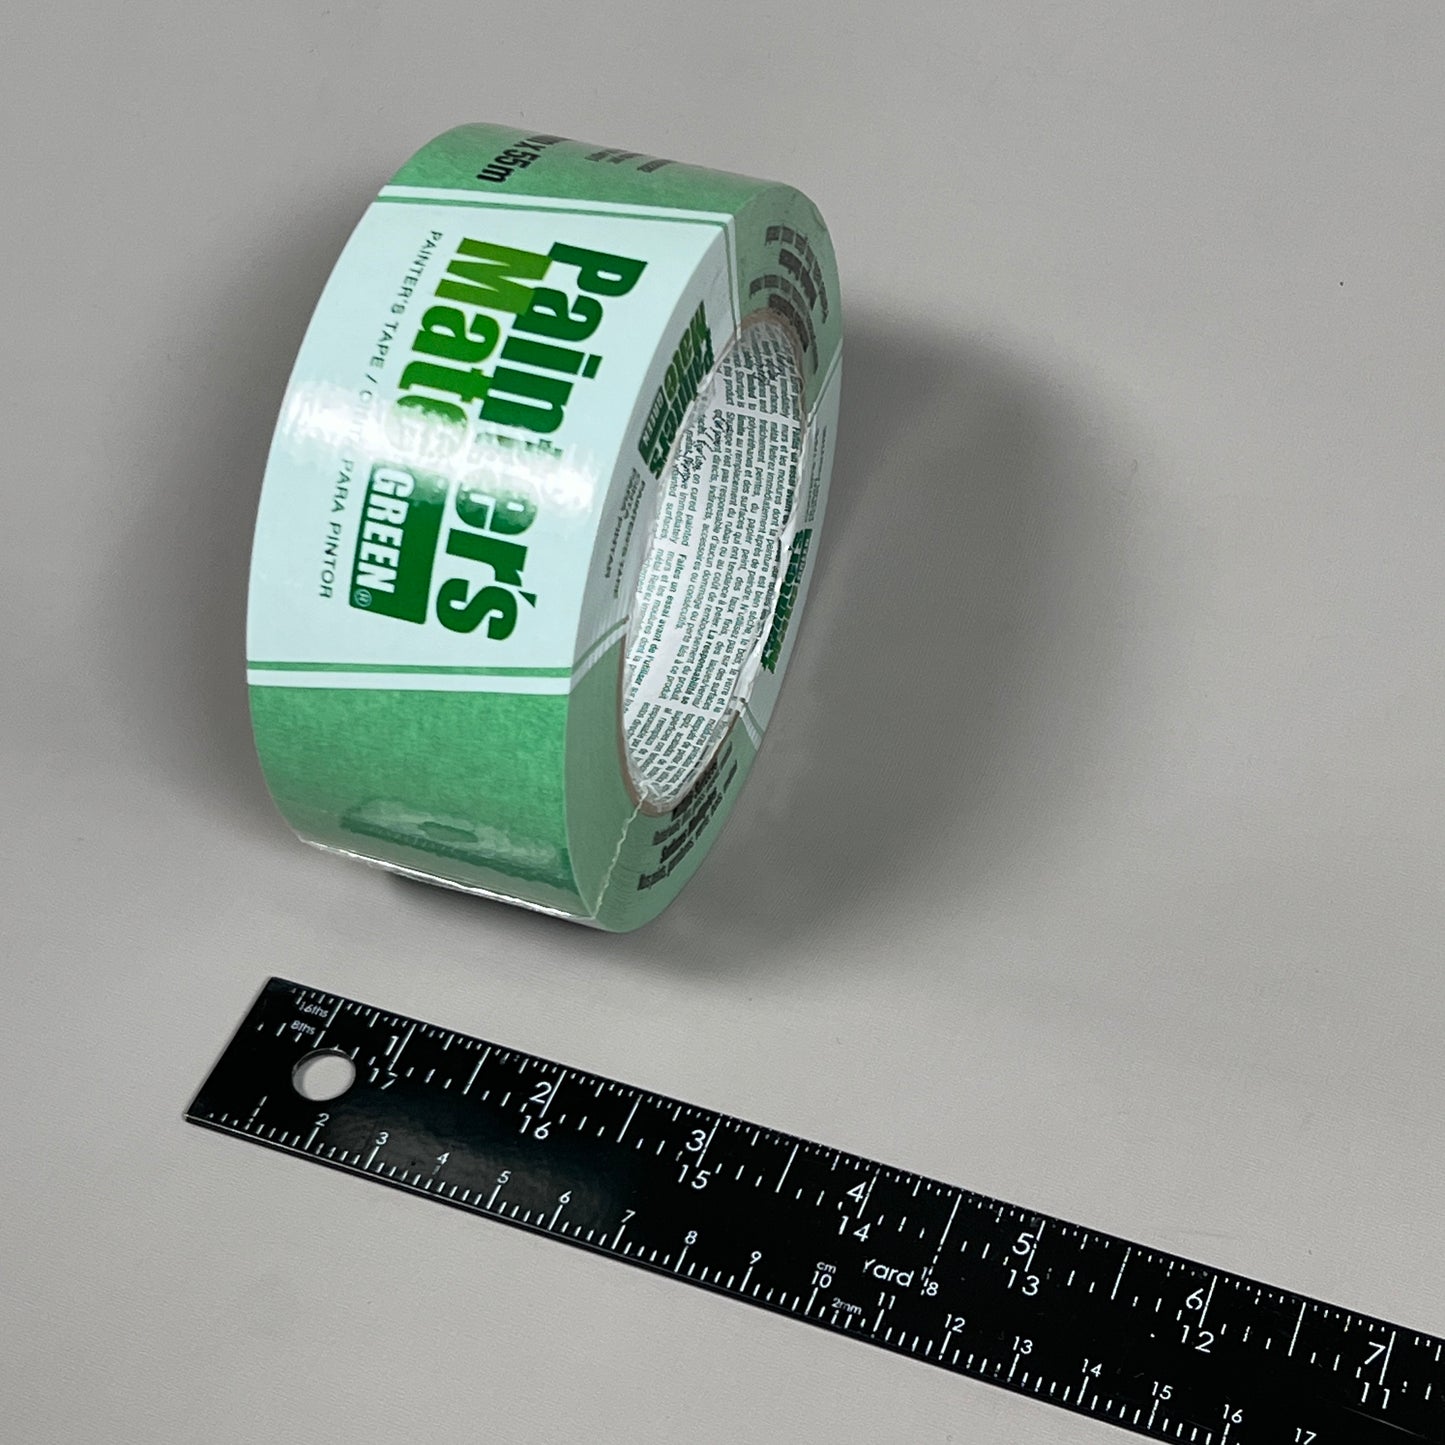 2-PK PAINTER'S MATE Multi-Surface Painter's Tape Green 1.88 IN x 60 YD 332262 (New)